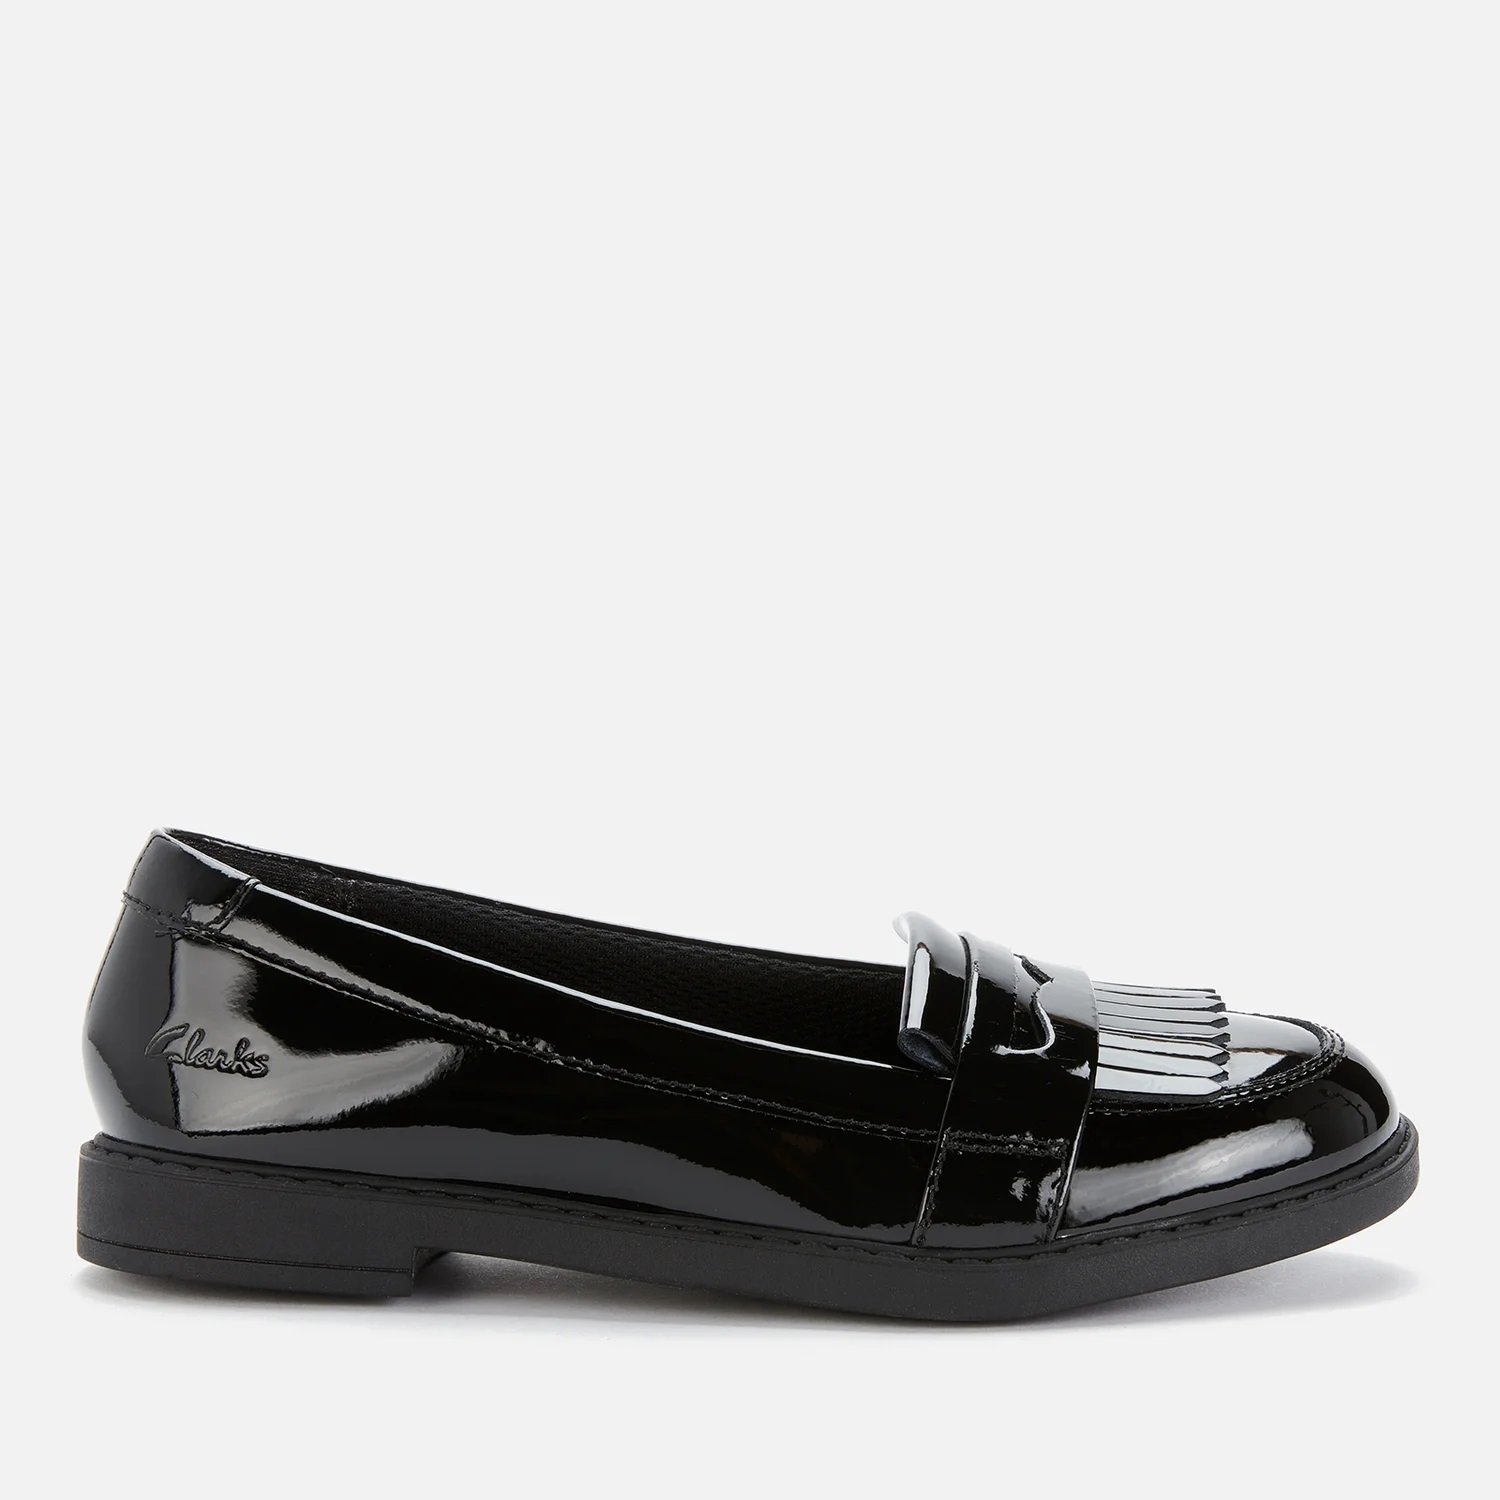 Clarks Girls Scala Bright Slip-On Loafers in Black Patent Leather.jpg